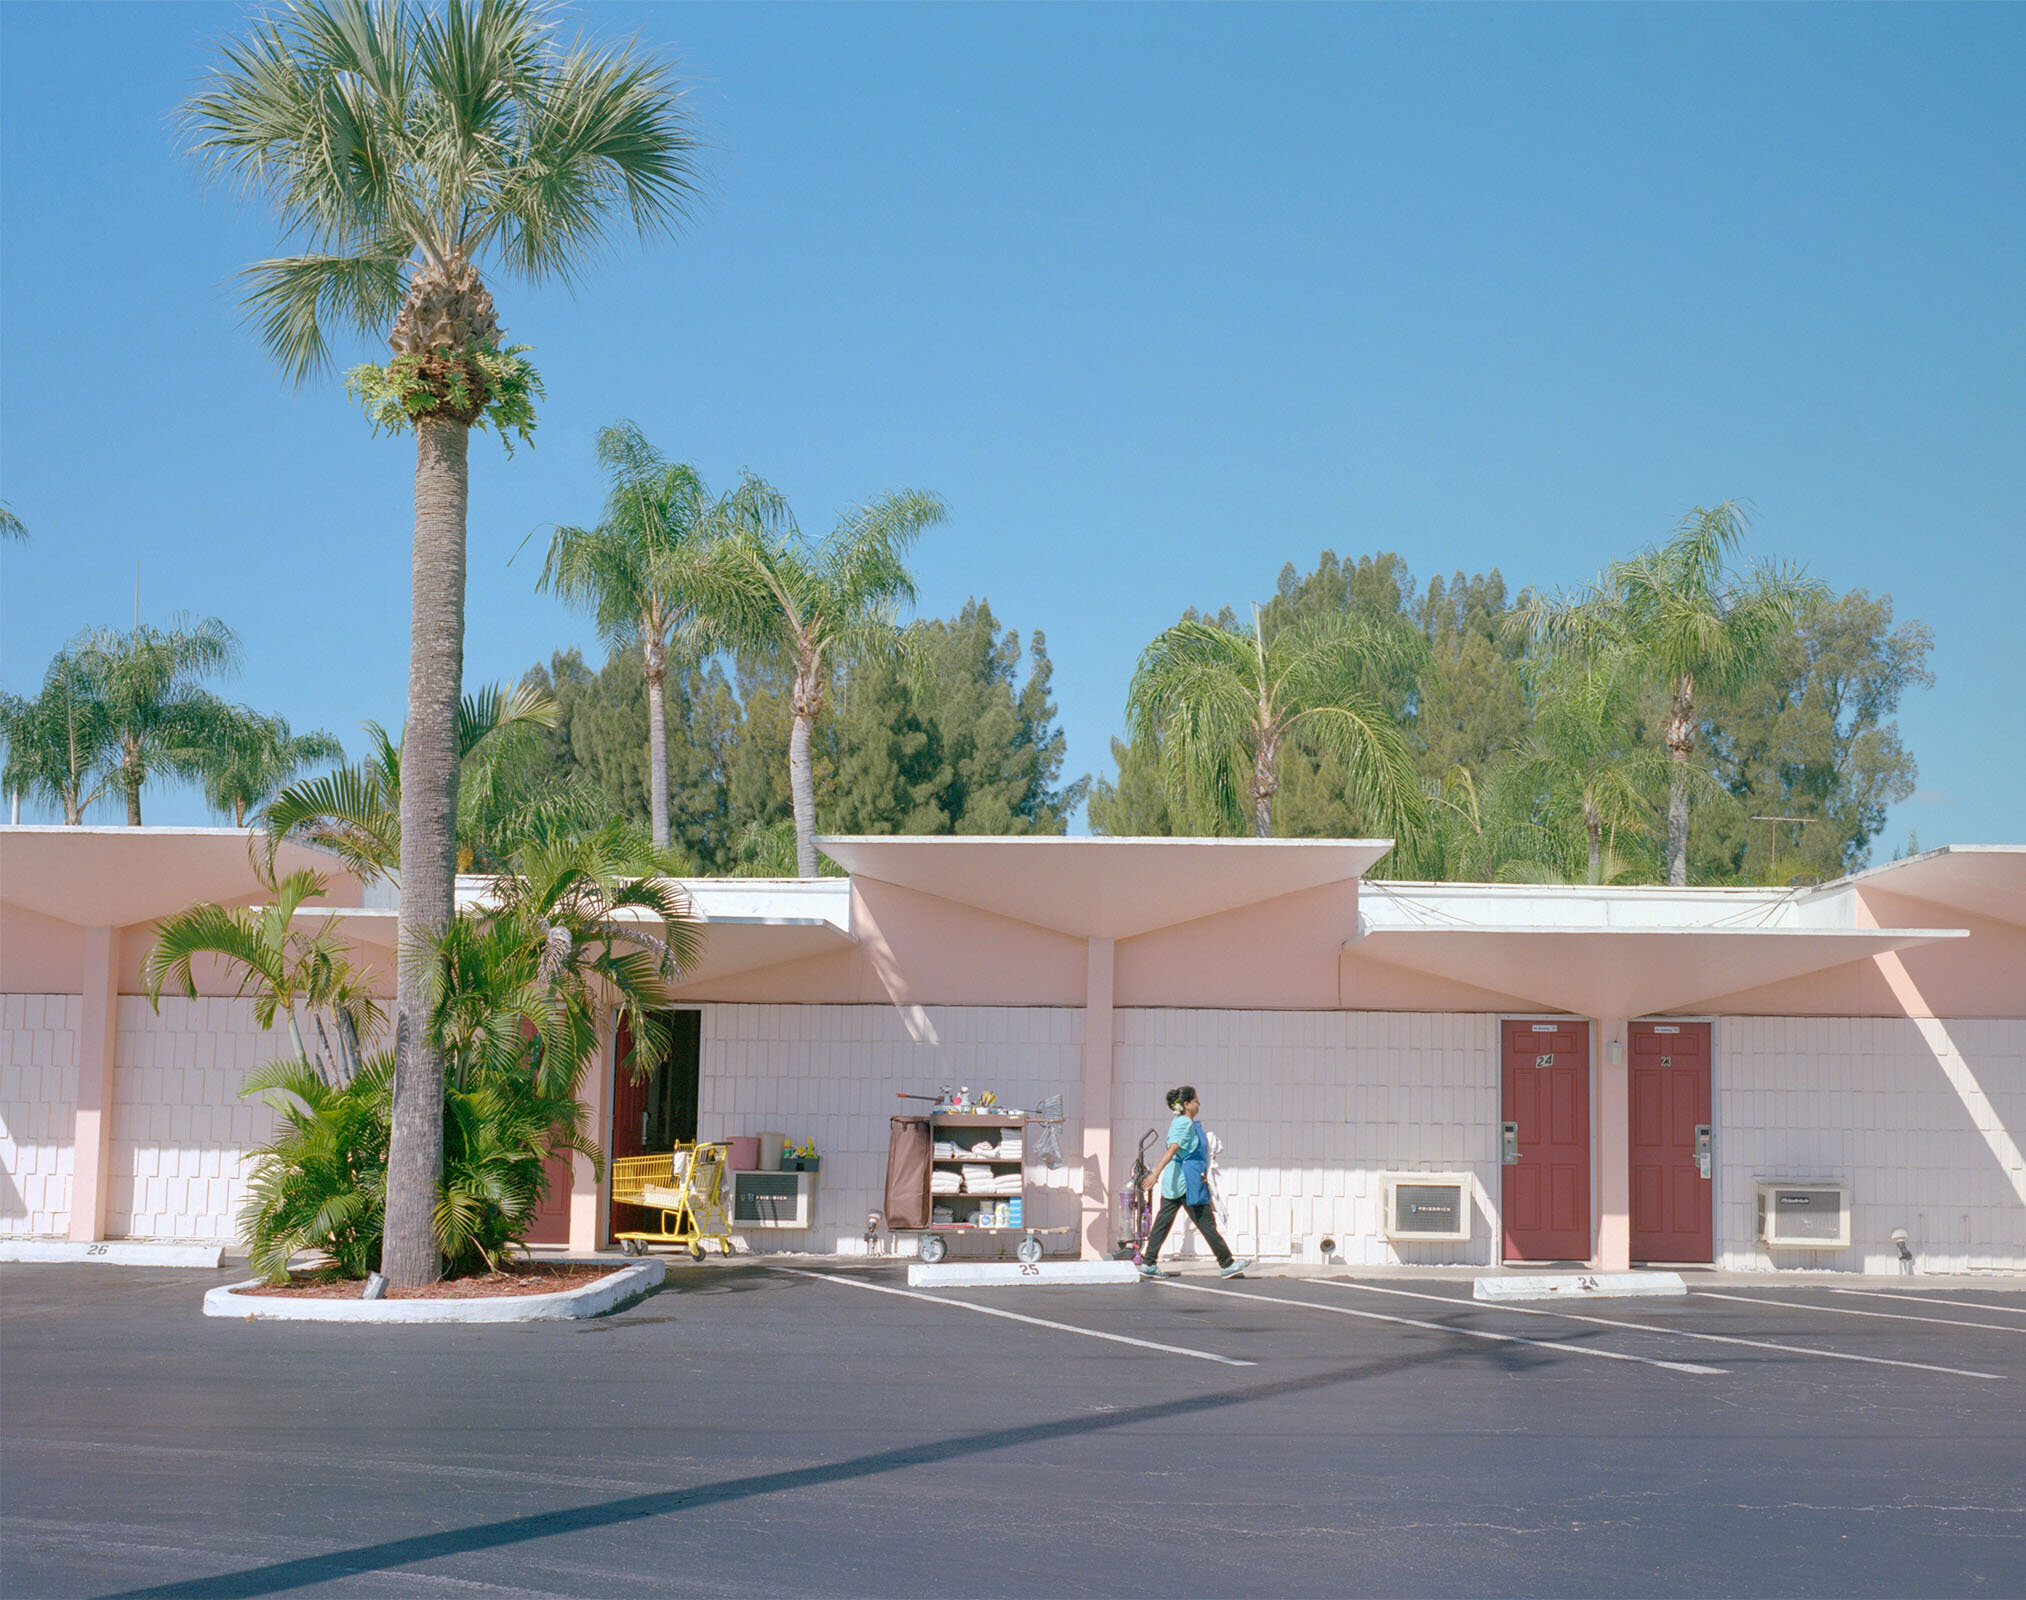  The majority of those who visit the springs are Europeans, many of whom stay at The Warm Mineral Springs Motel. Thousands have permanently moved from Europe to North Port so they can visit the springs daily.  